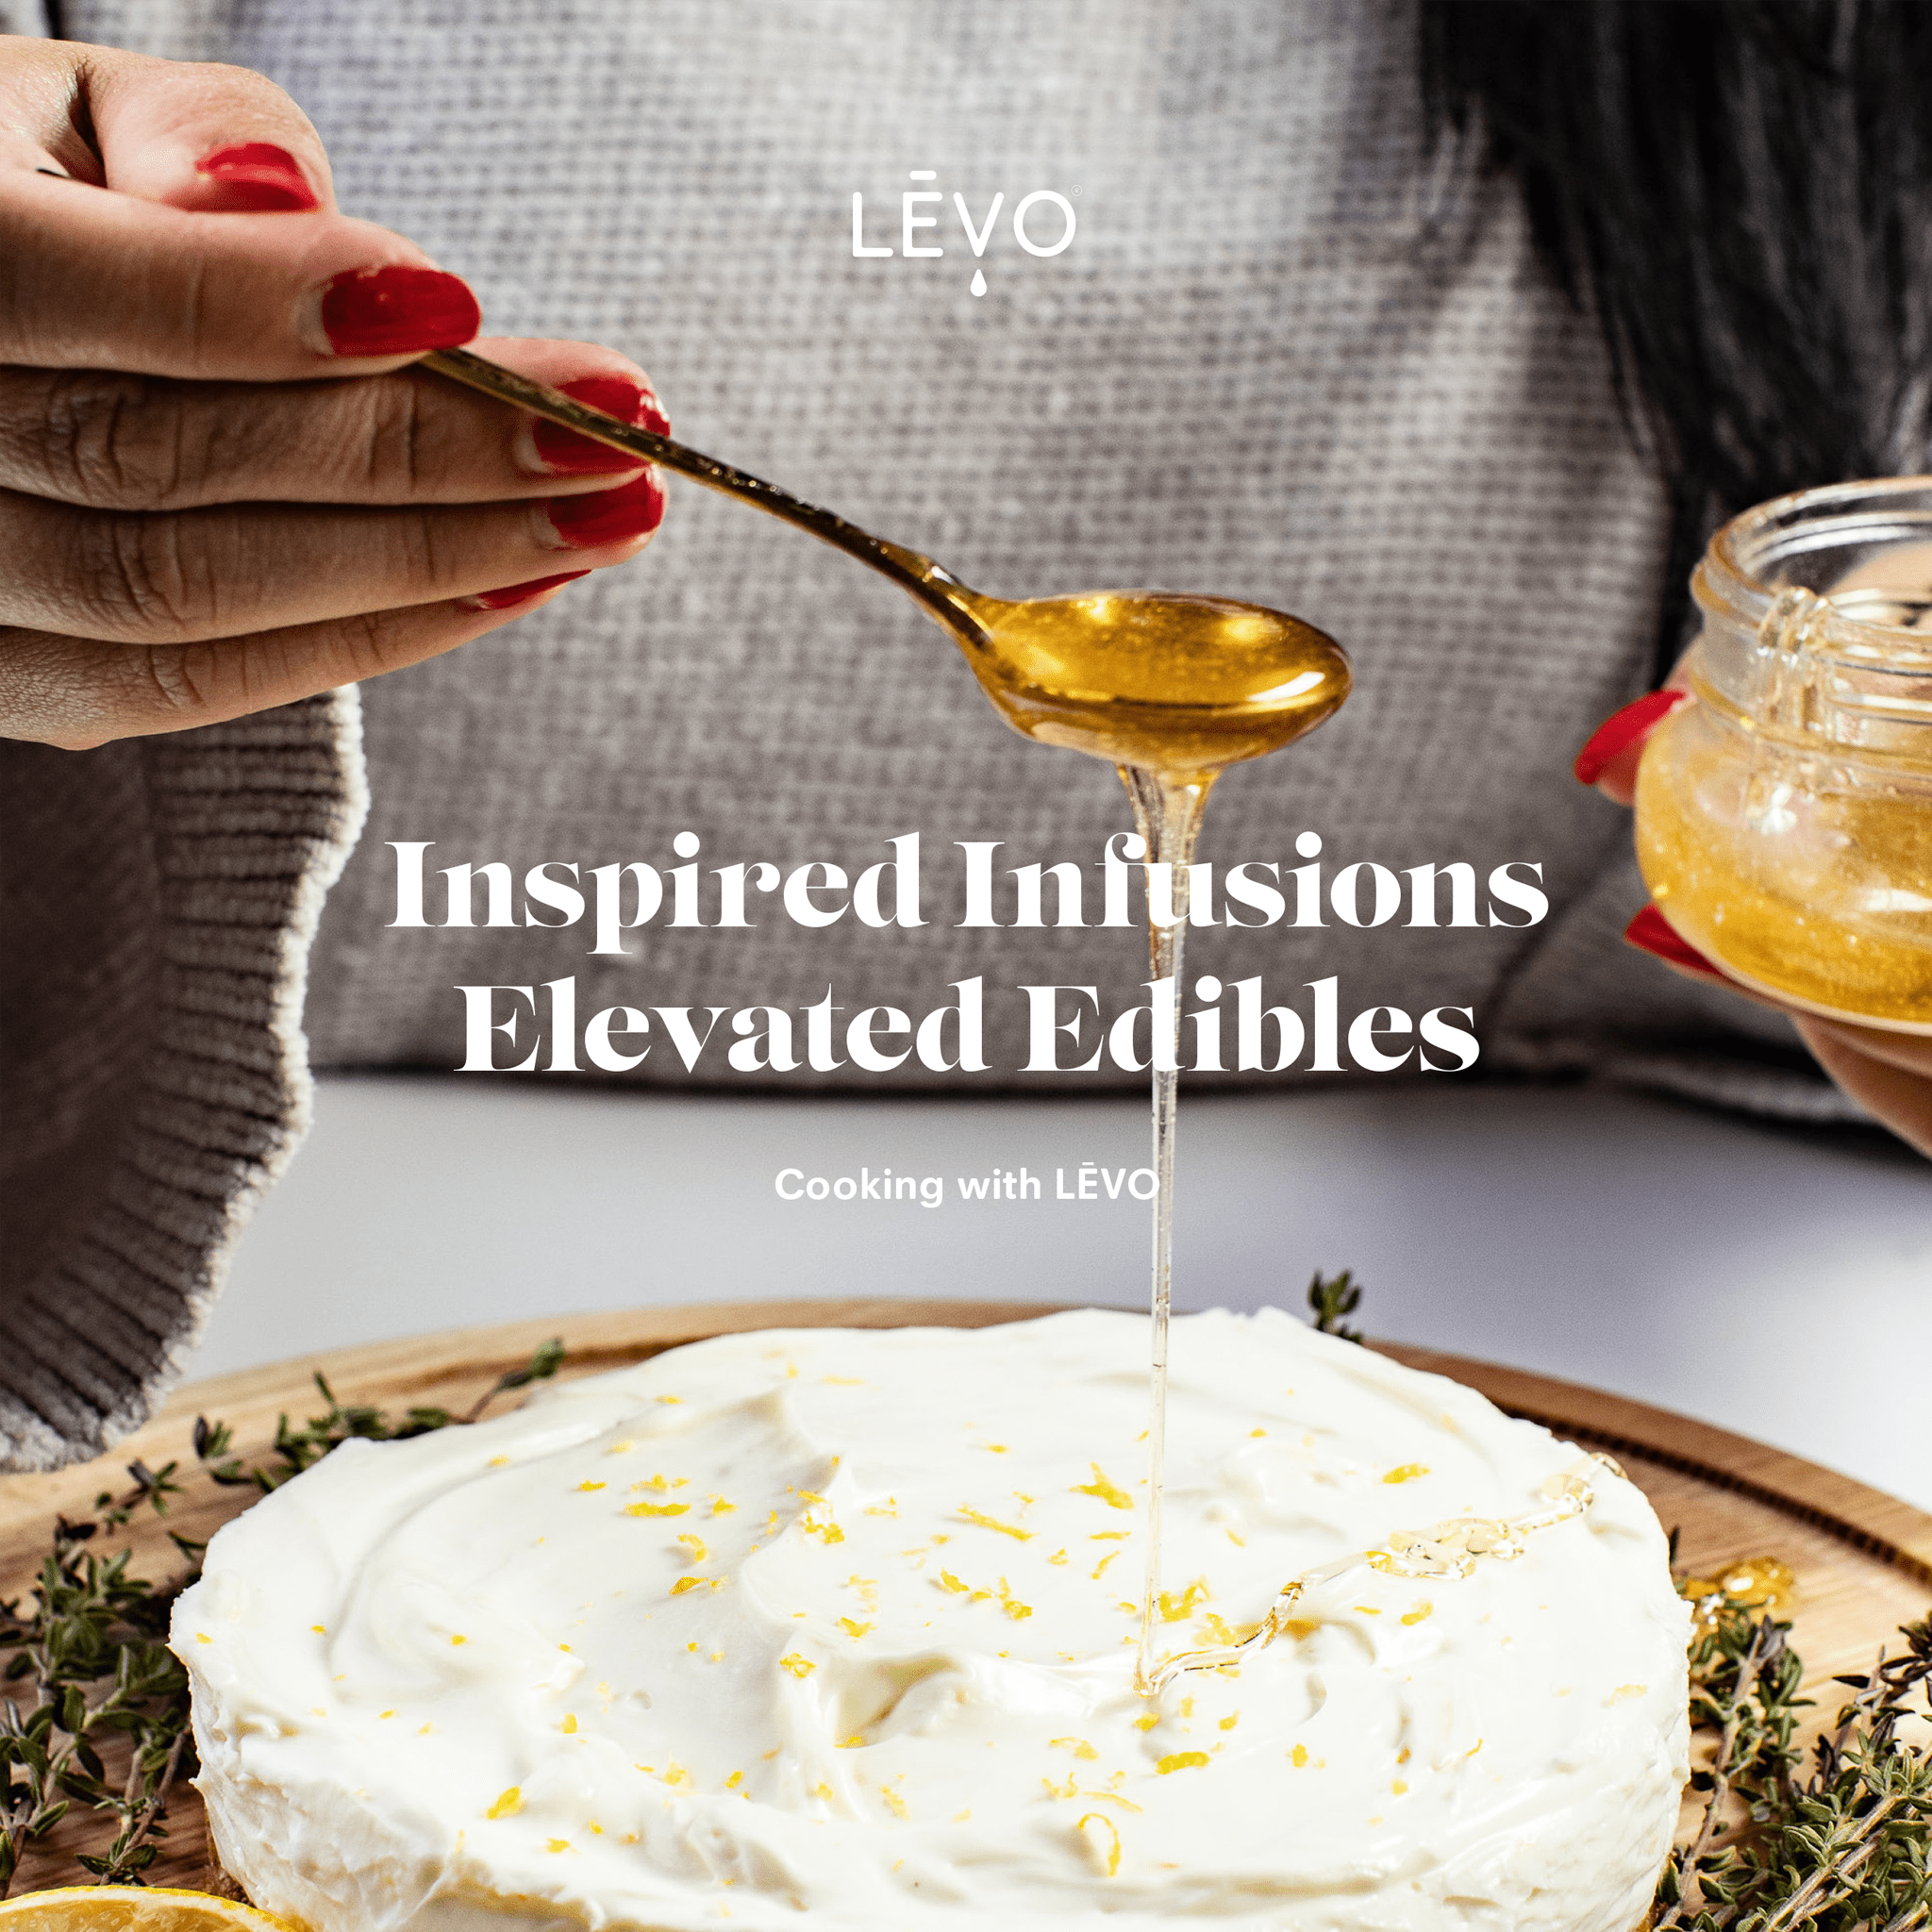 LEVO "Inspired Infusions, Elevated Edibles" cookbook features over 30 recipes to enhance your LEVO Oil Infusion experience and teach you new creations!